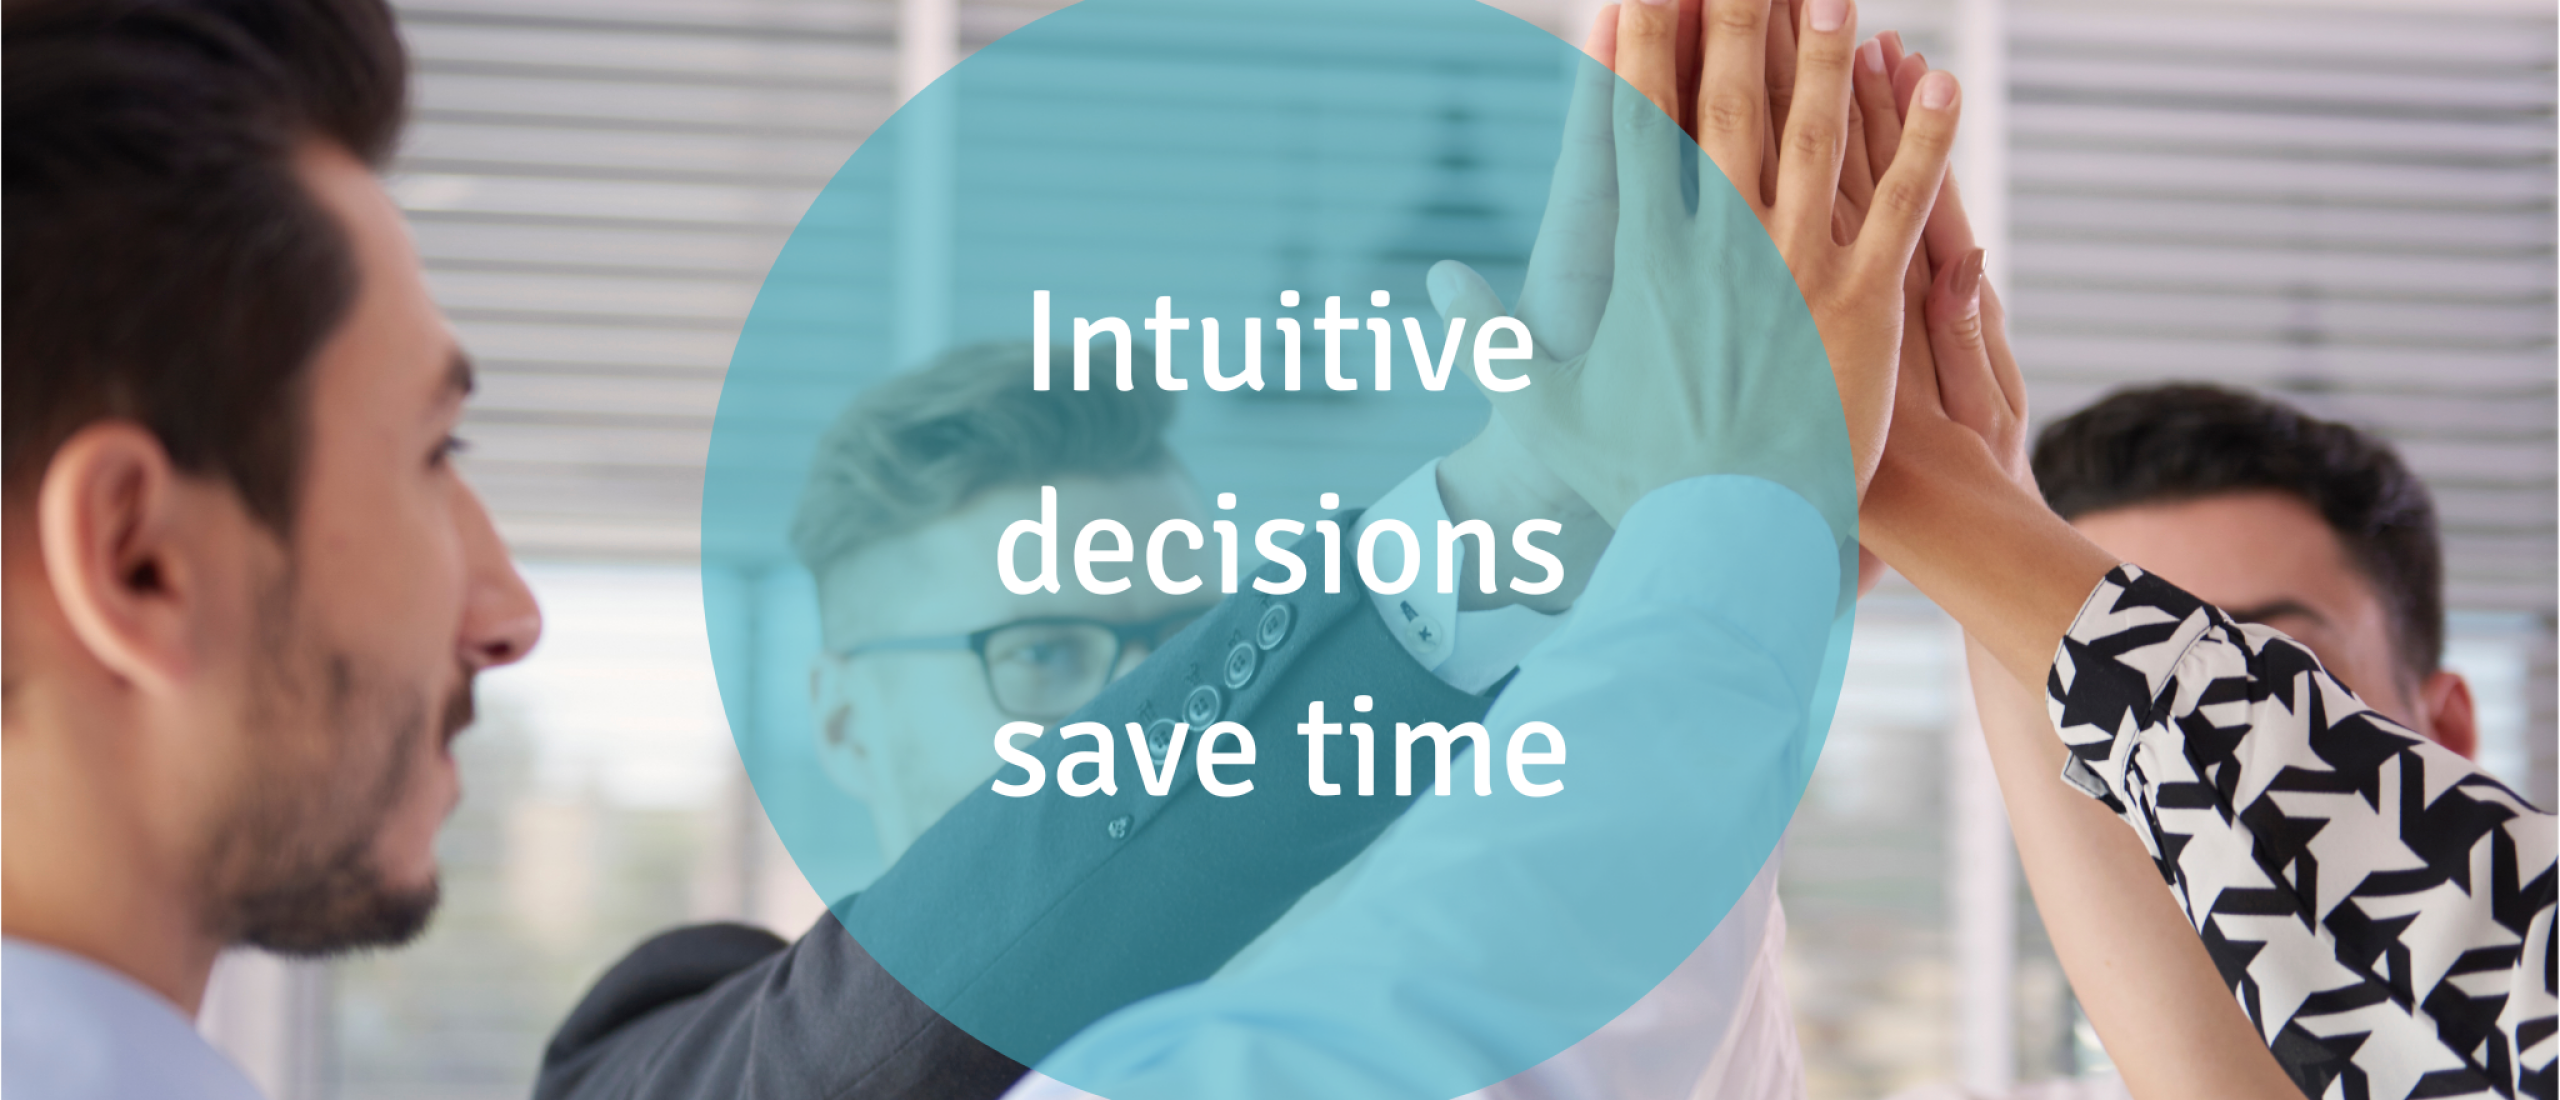 Intuitive decisions save time